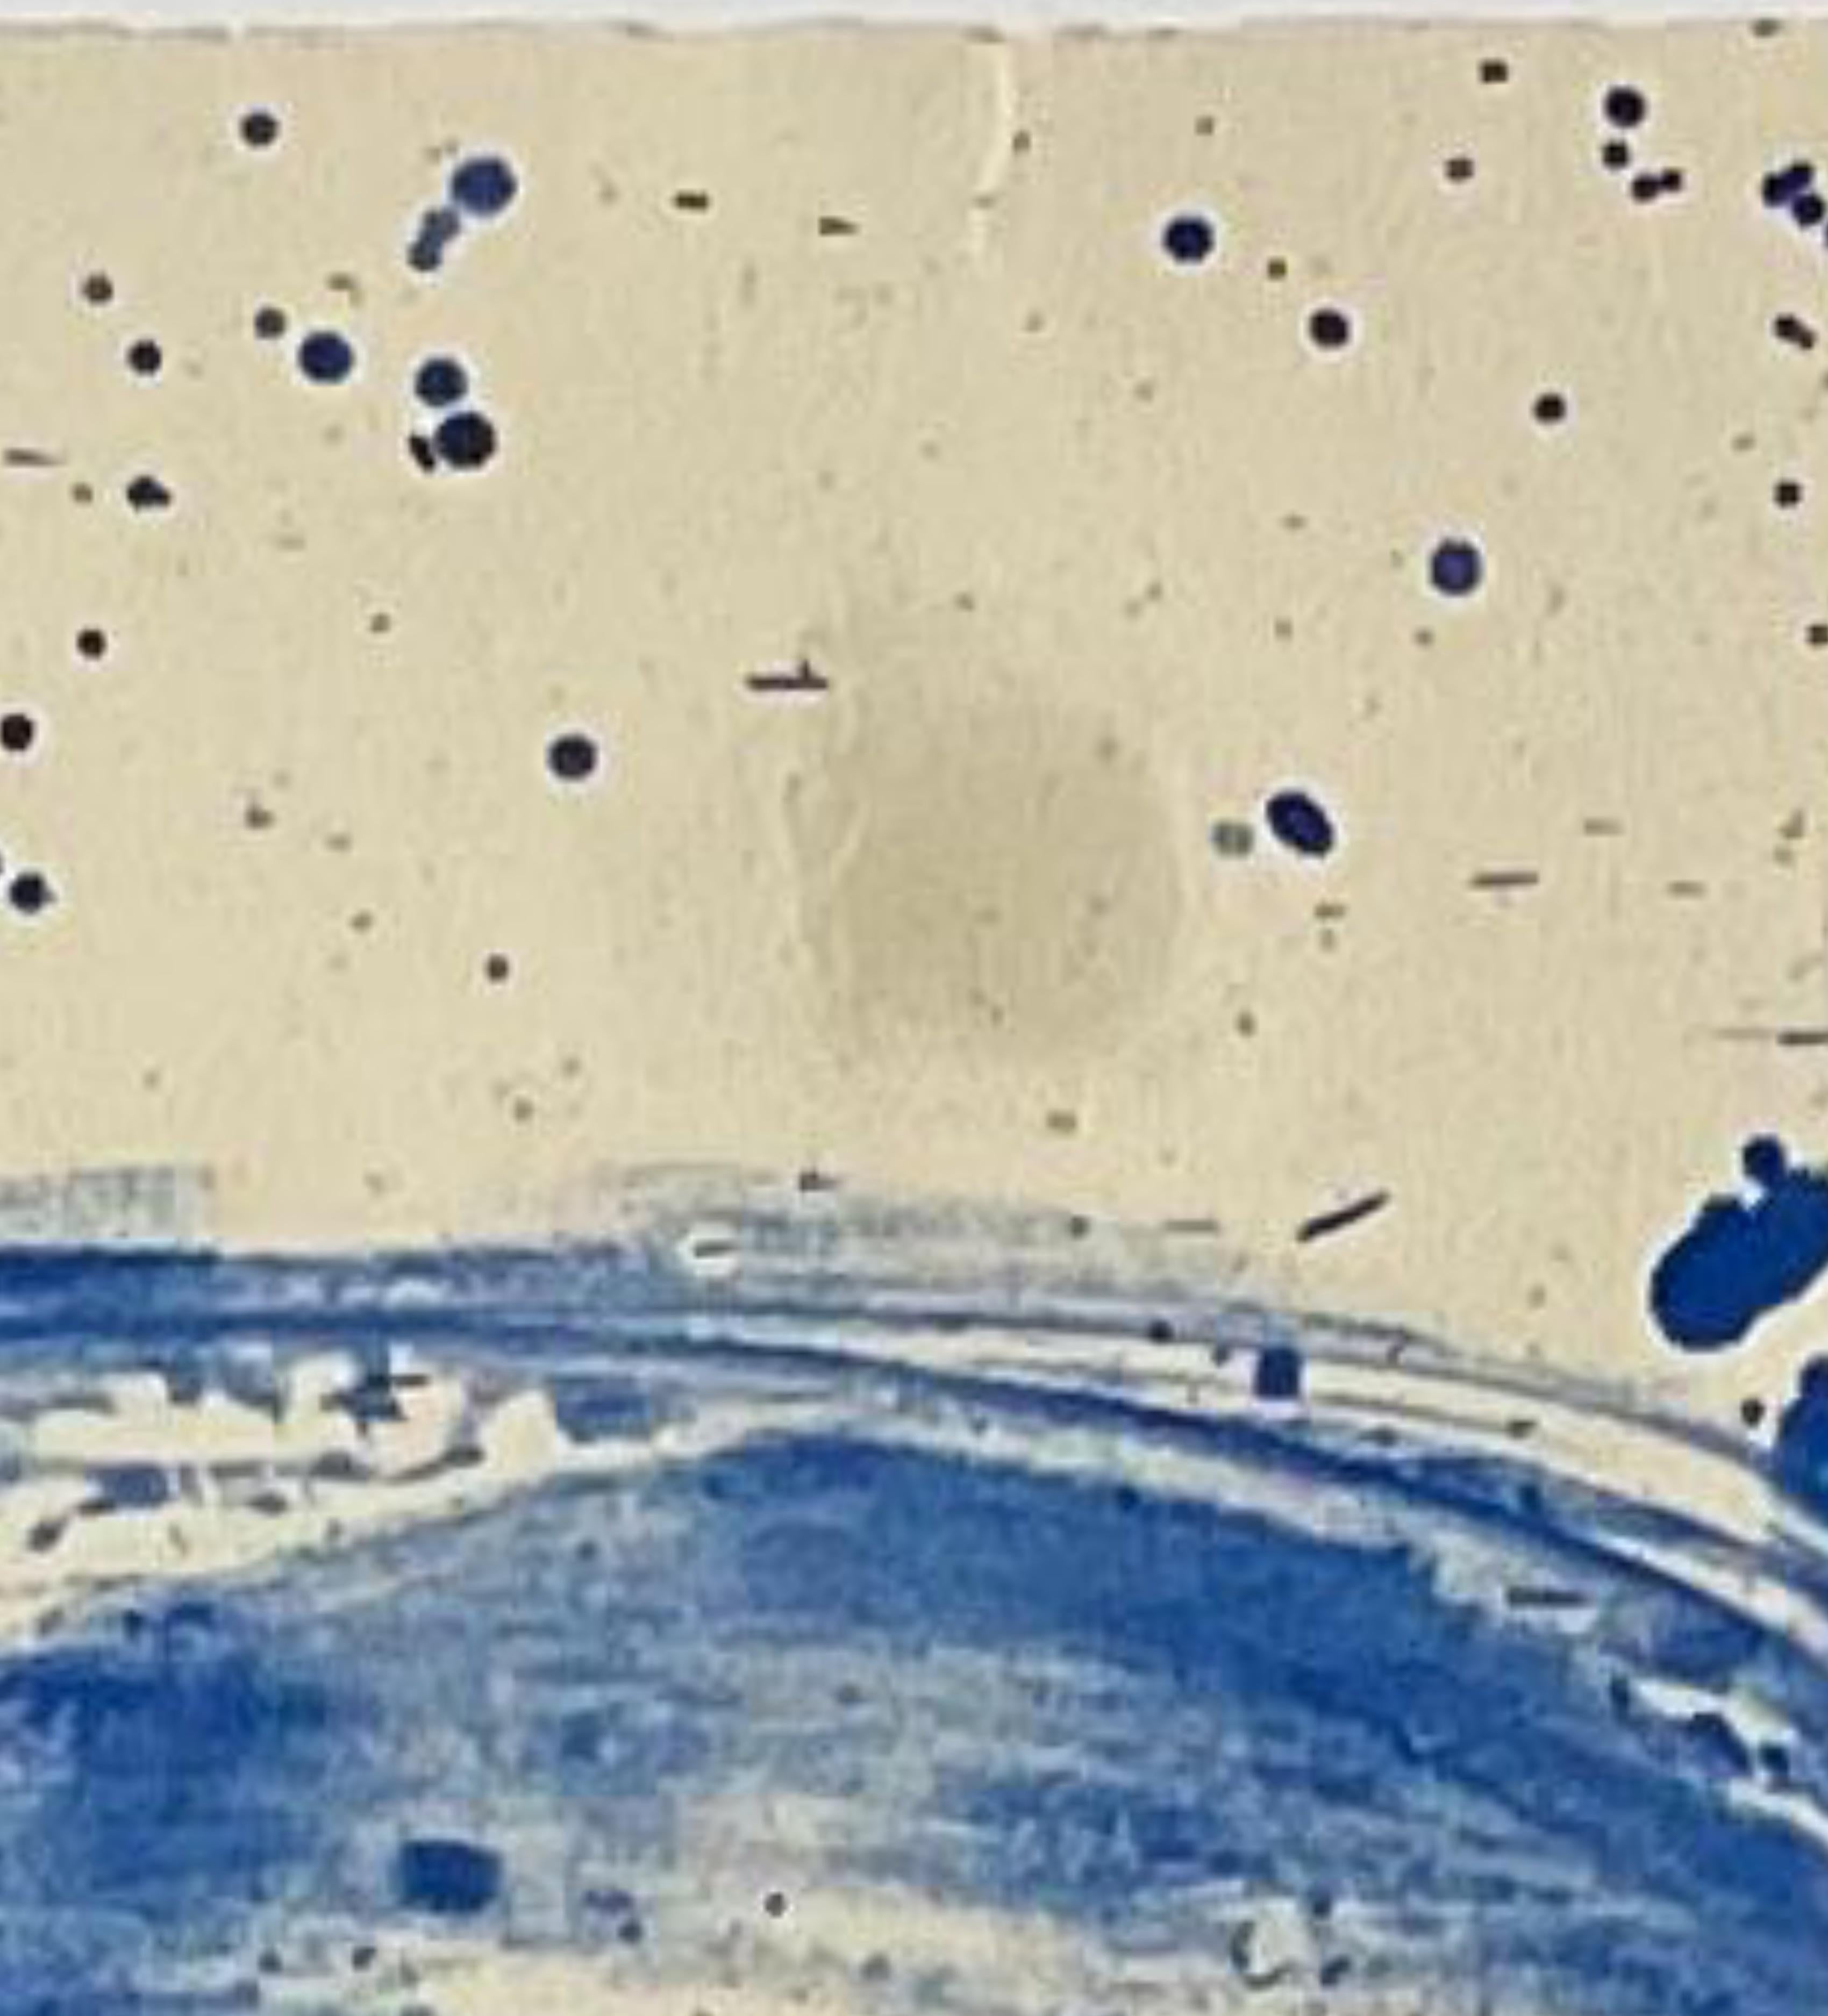 Sam Francis
The Coldest Stone (Lembark, 15), 1960
Lithograph on BFK Rives wove paper with deckled edges
25 × 36 inches
Signed and numbered 8/65 by Sam Francis on the front in graphite pencil on the front
Unframed 
Marvelous 1960 Sam Francis